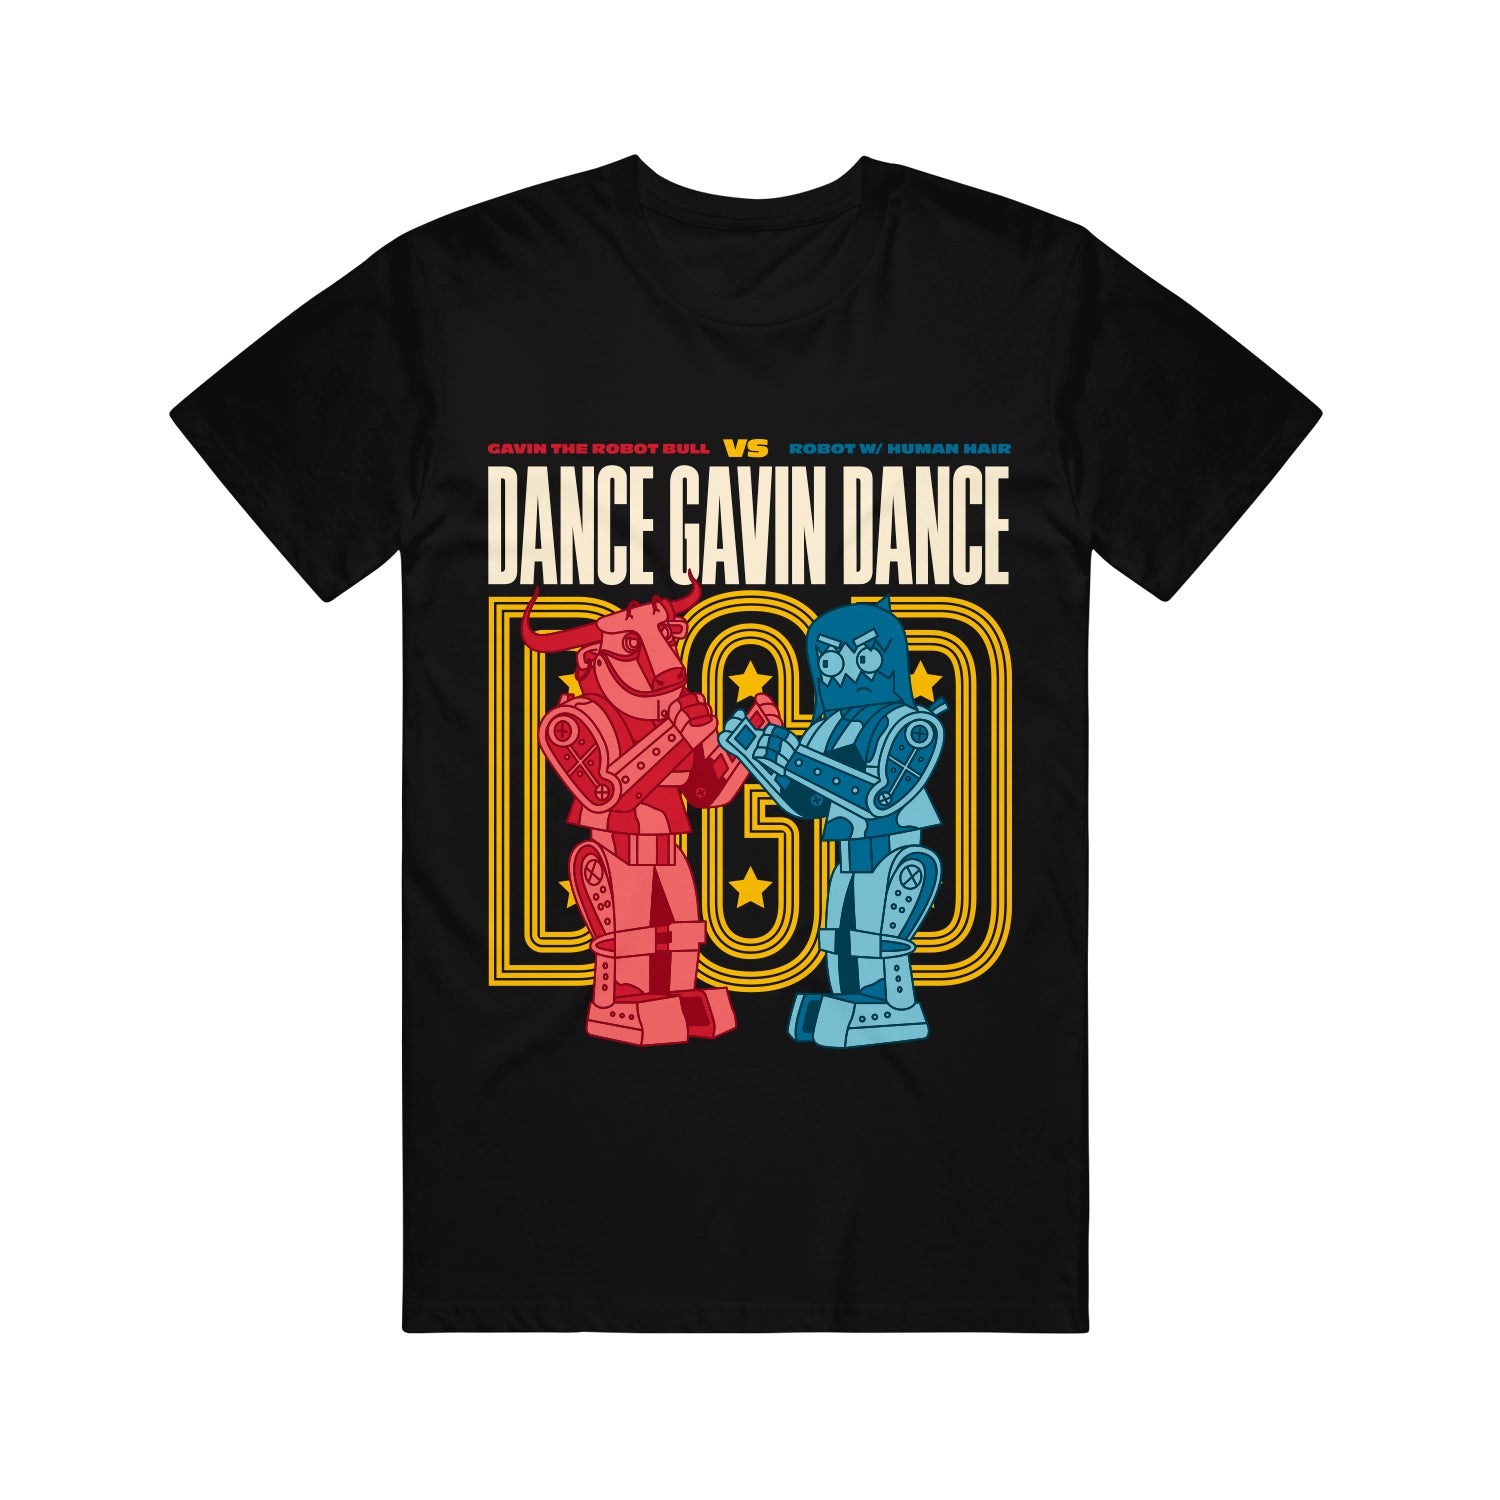 black tee shirt on white background with full chest print that has multi colors that says dance gavin dance in cream across chest and D G D in yellow below with two robots, one in pink on right of tee and one in blue on left, fighting. 